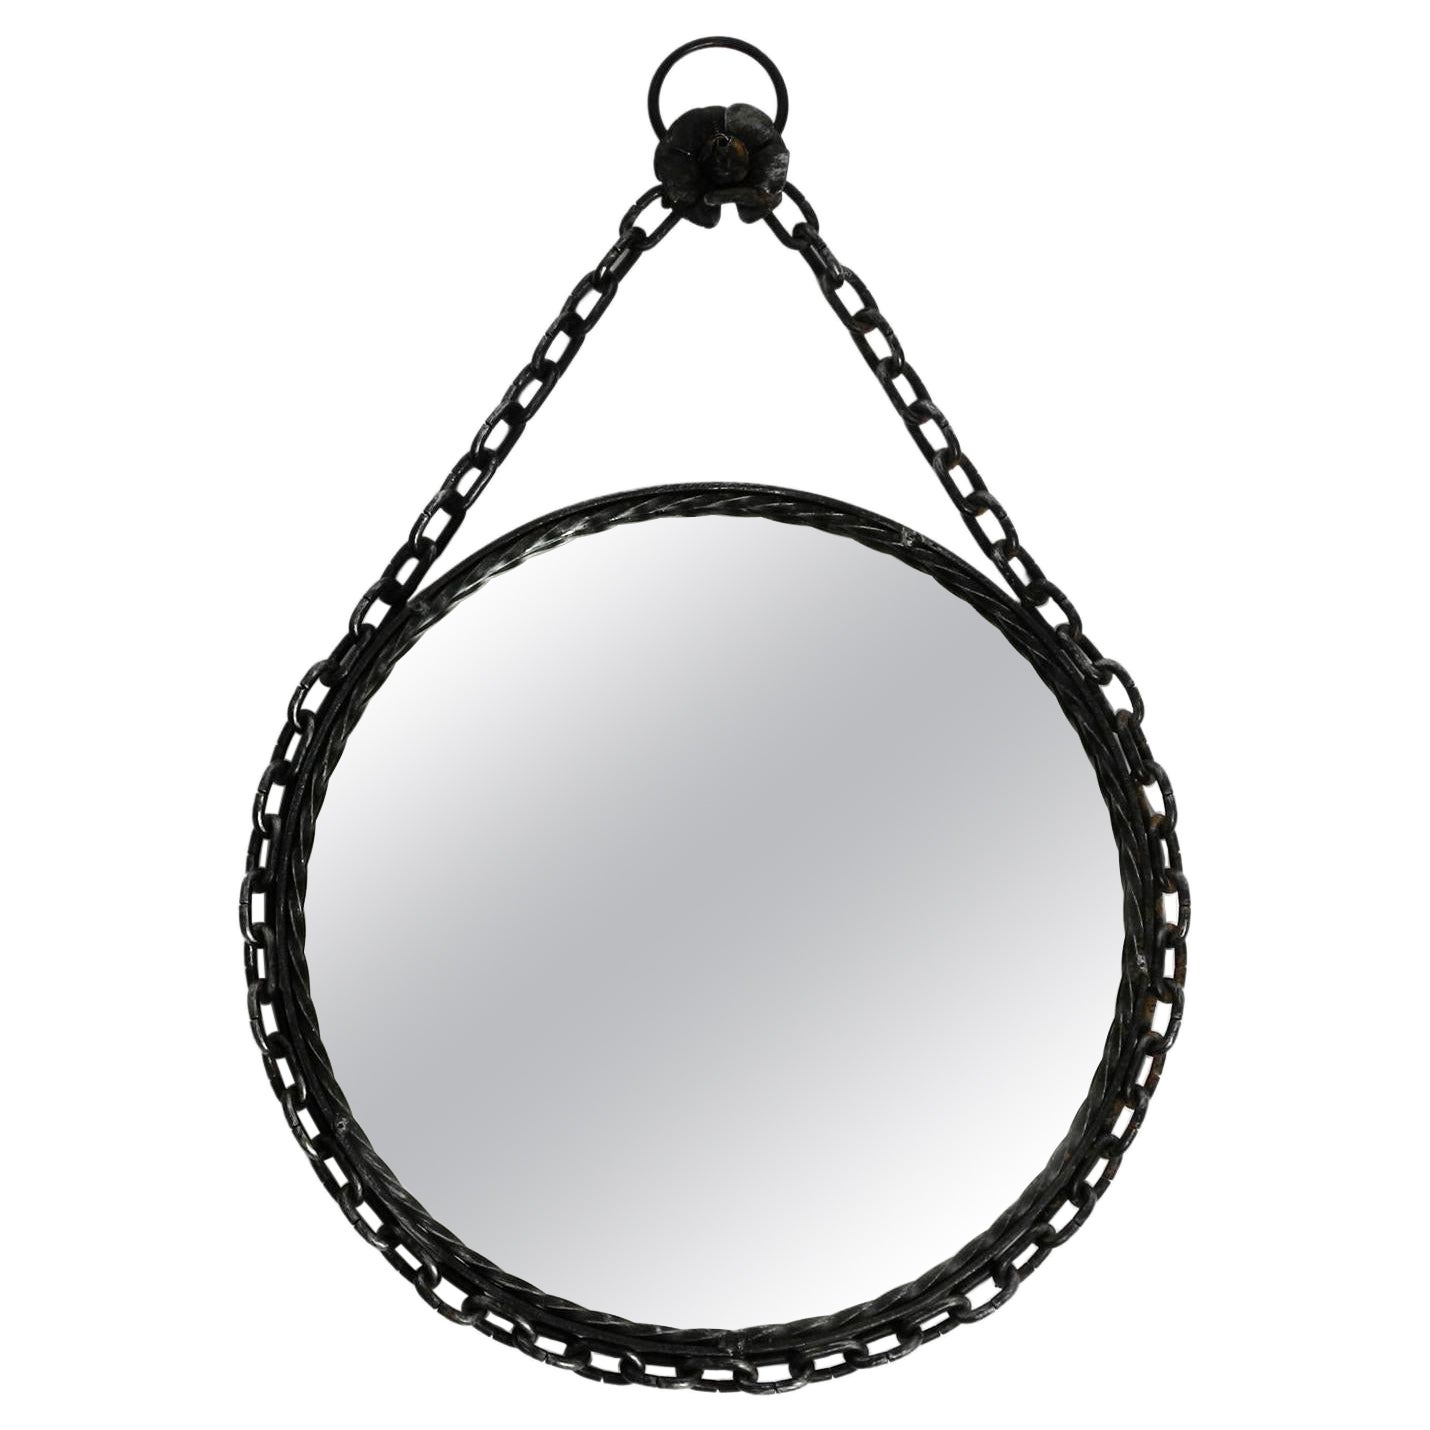 Heavy Brutalist Mid-Century Design Wall Mirror with Wrought Iron Frame and Chain